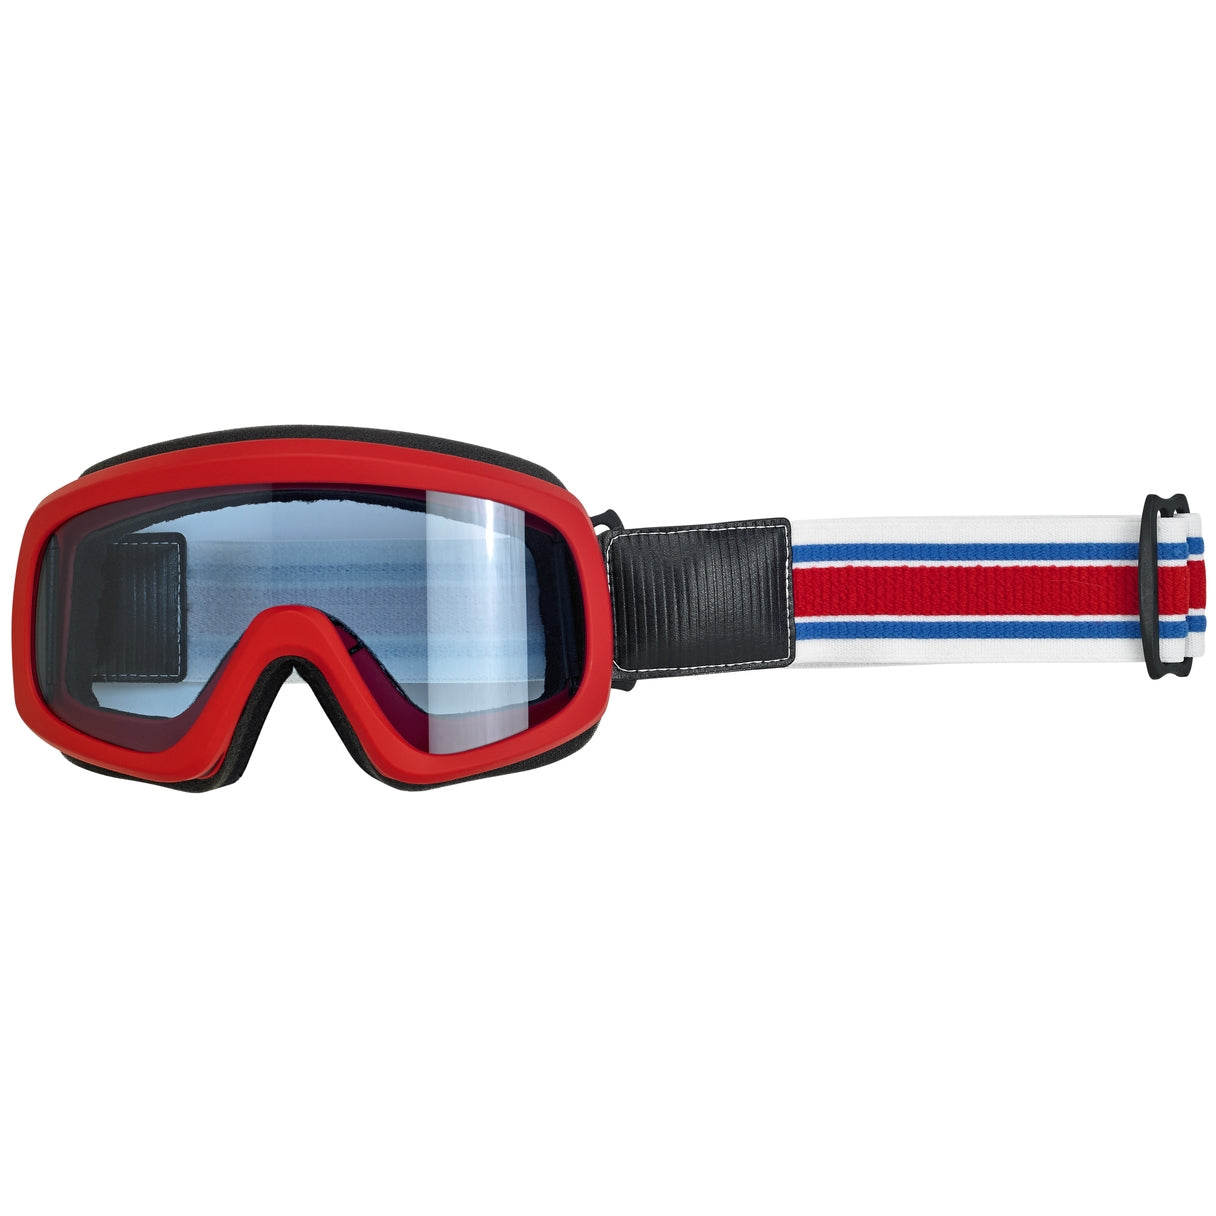 Overland 2.0 Goggle - Racer Red White Blue